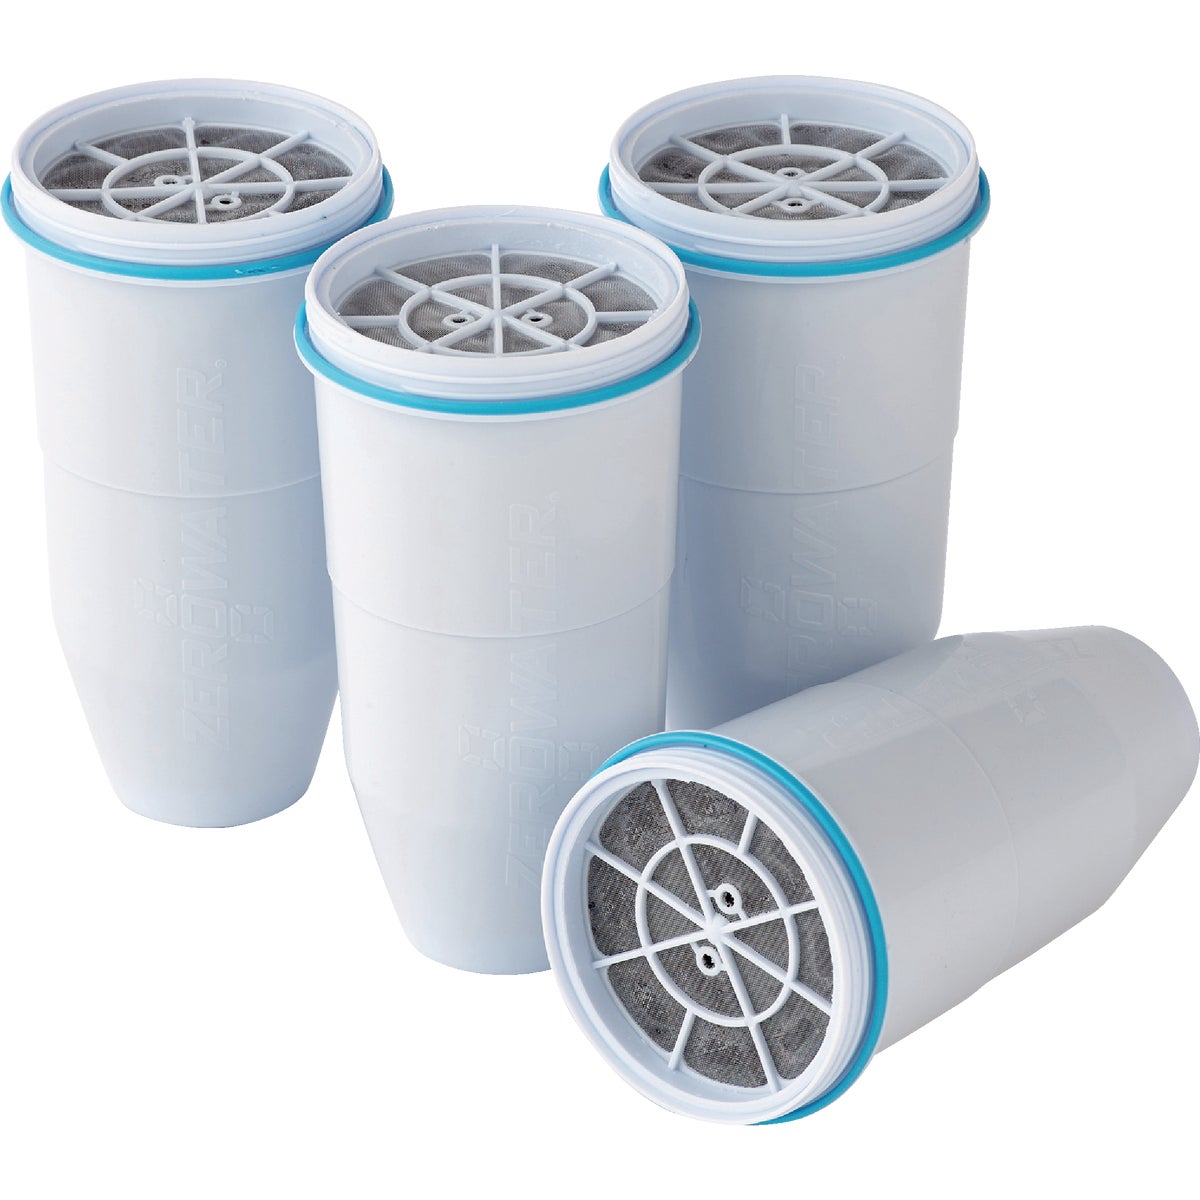 Zero Water Pitcher Water Filter Replacement Cartridge (4-Pack)